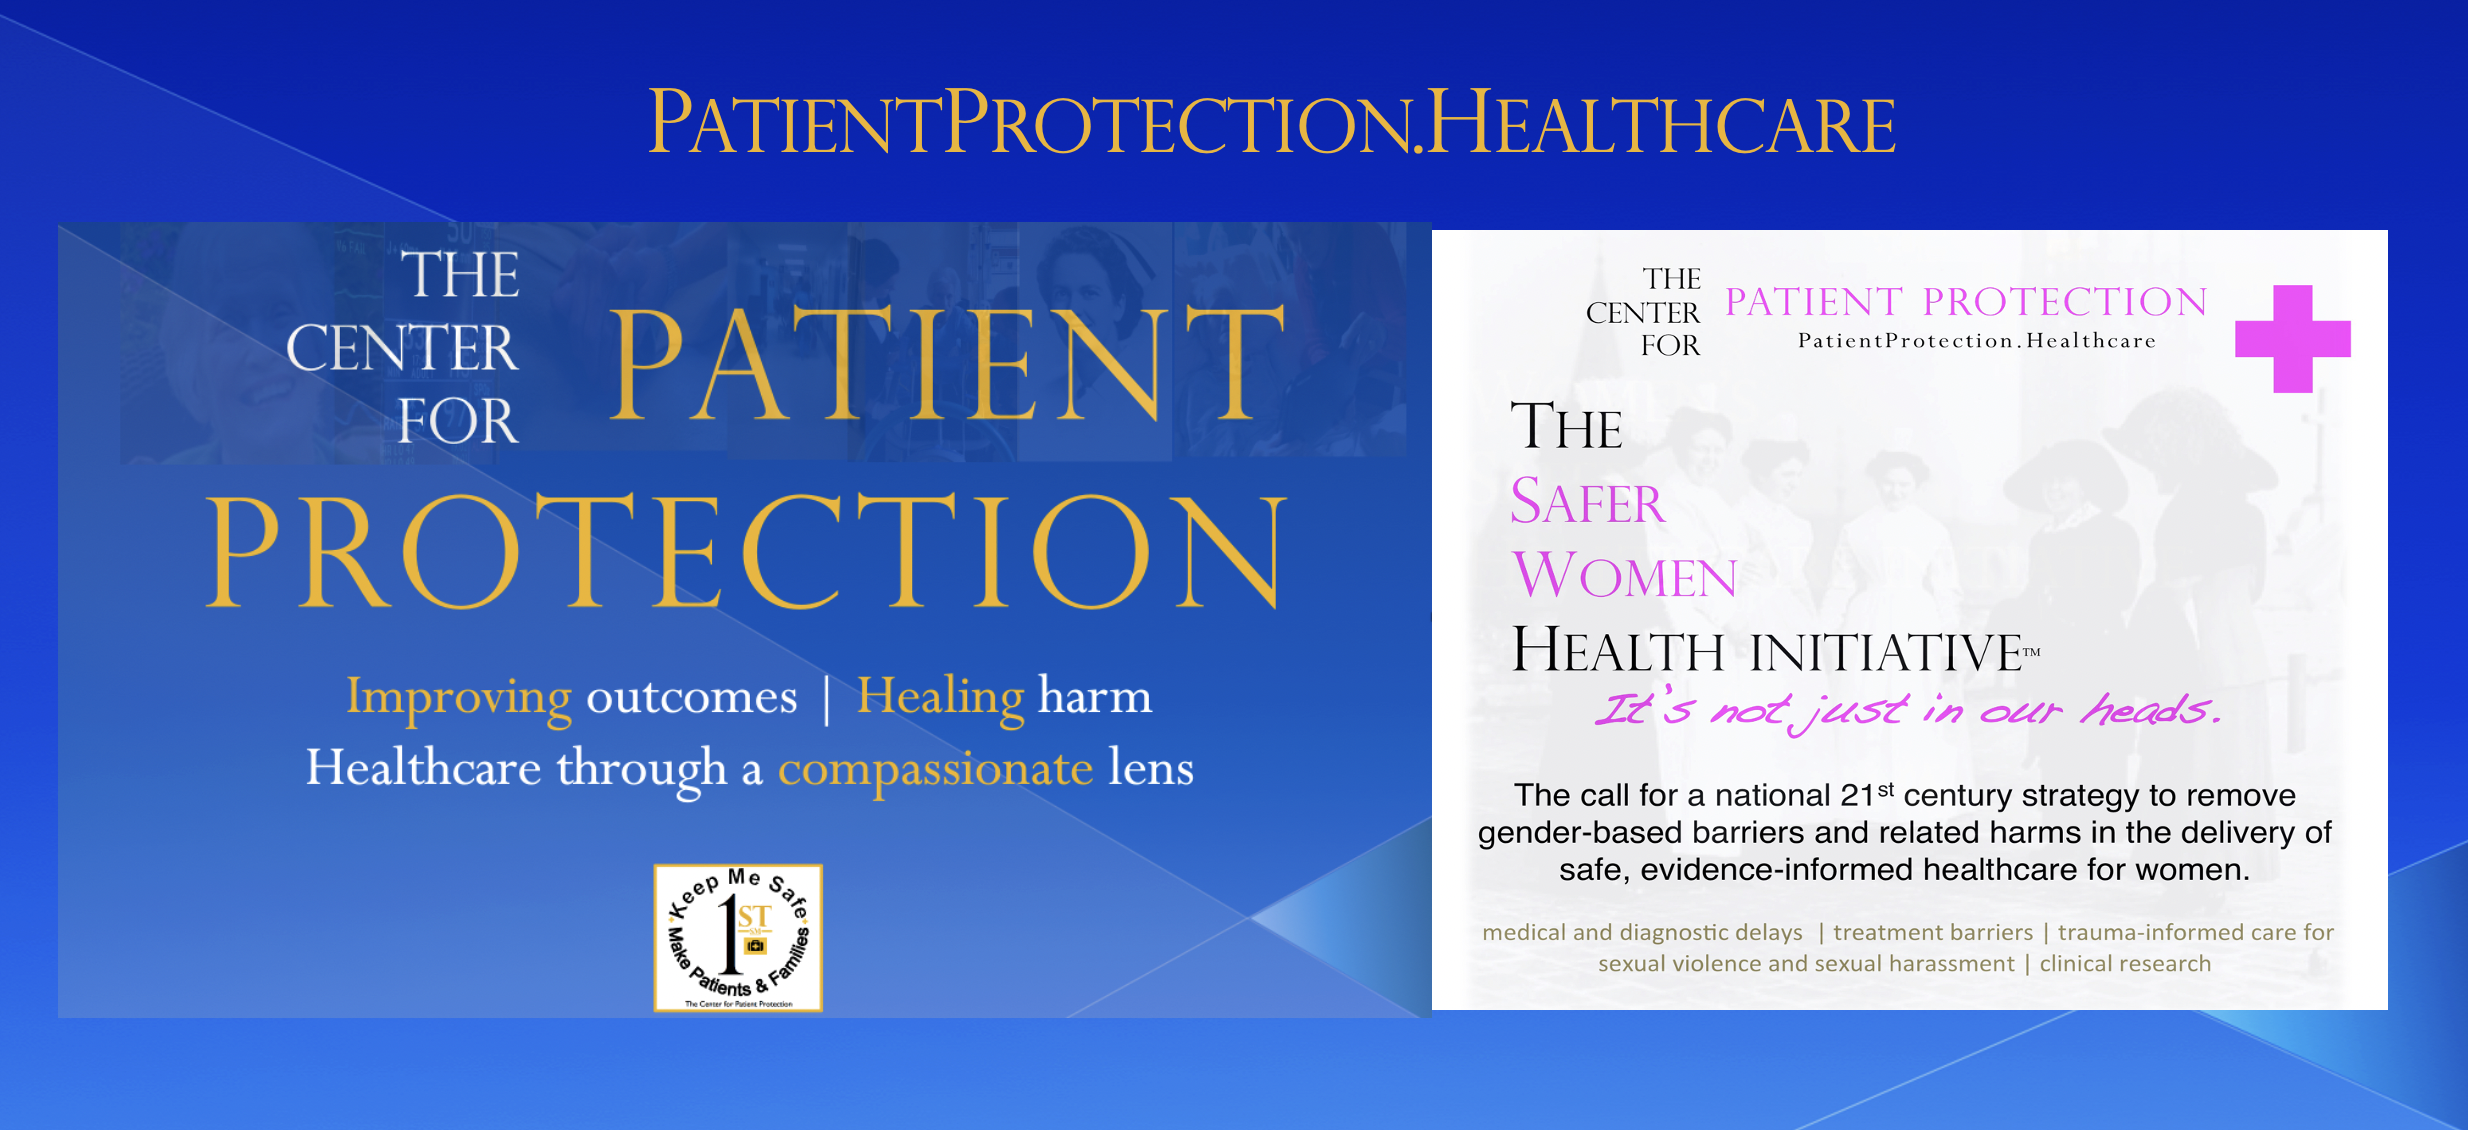 The Center for Patient Protection